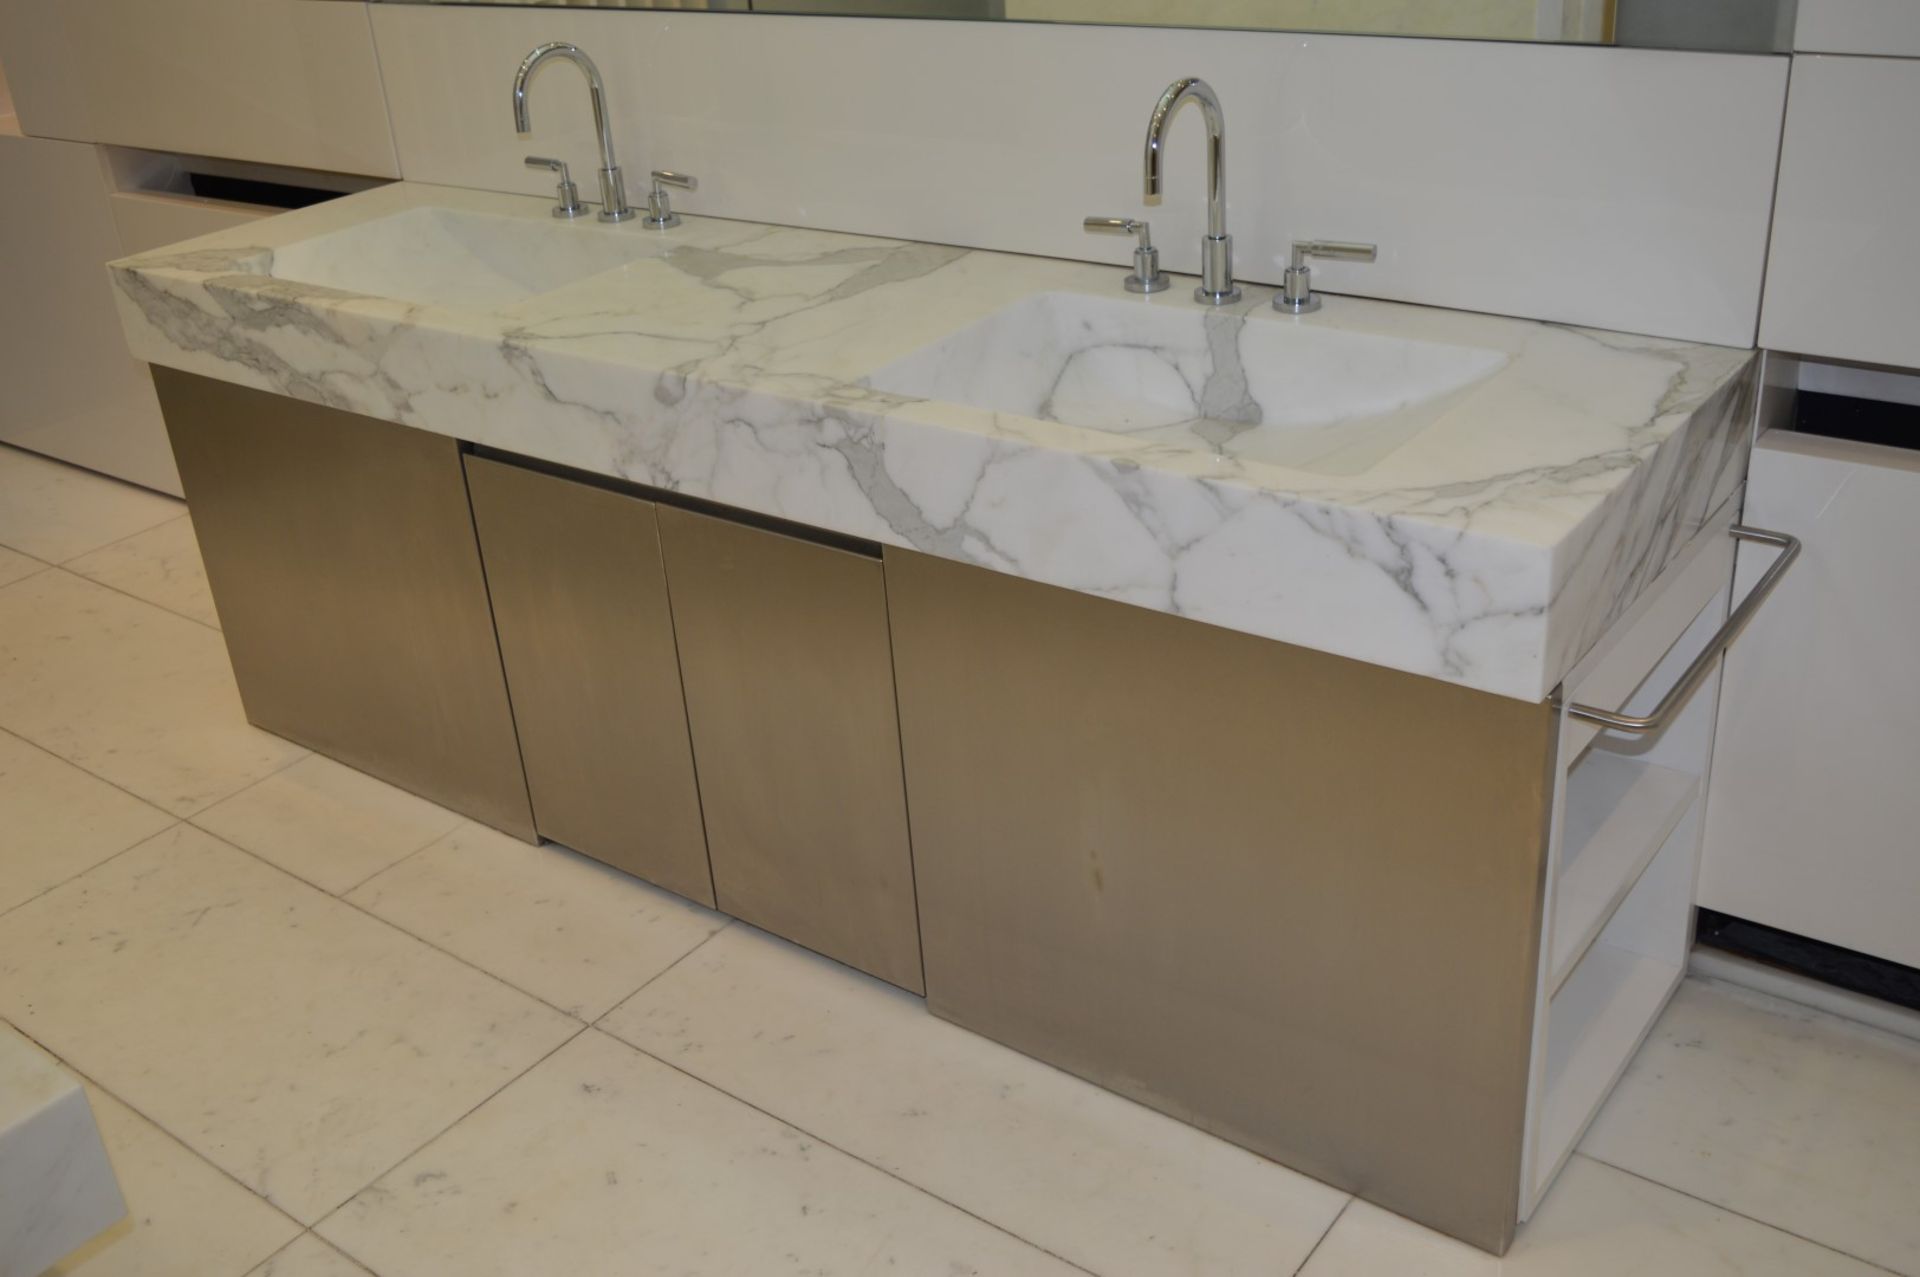 1 x Bespoke His & Hers Marble Bathroom Vanity Unit - Exquisite 7ft Twin Marble Sink Basin With Two